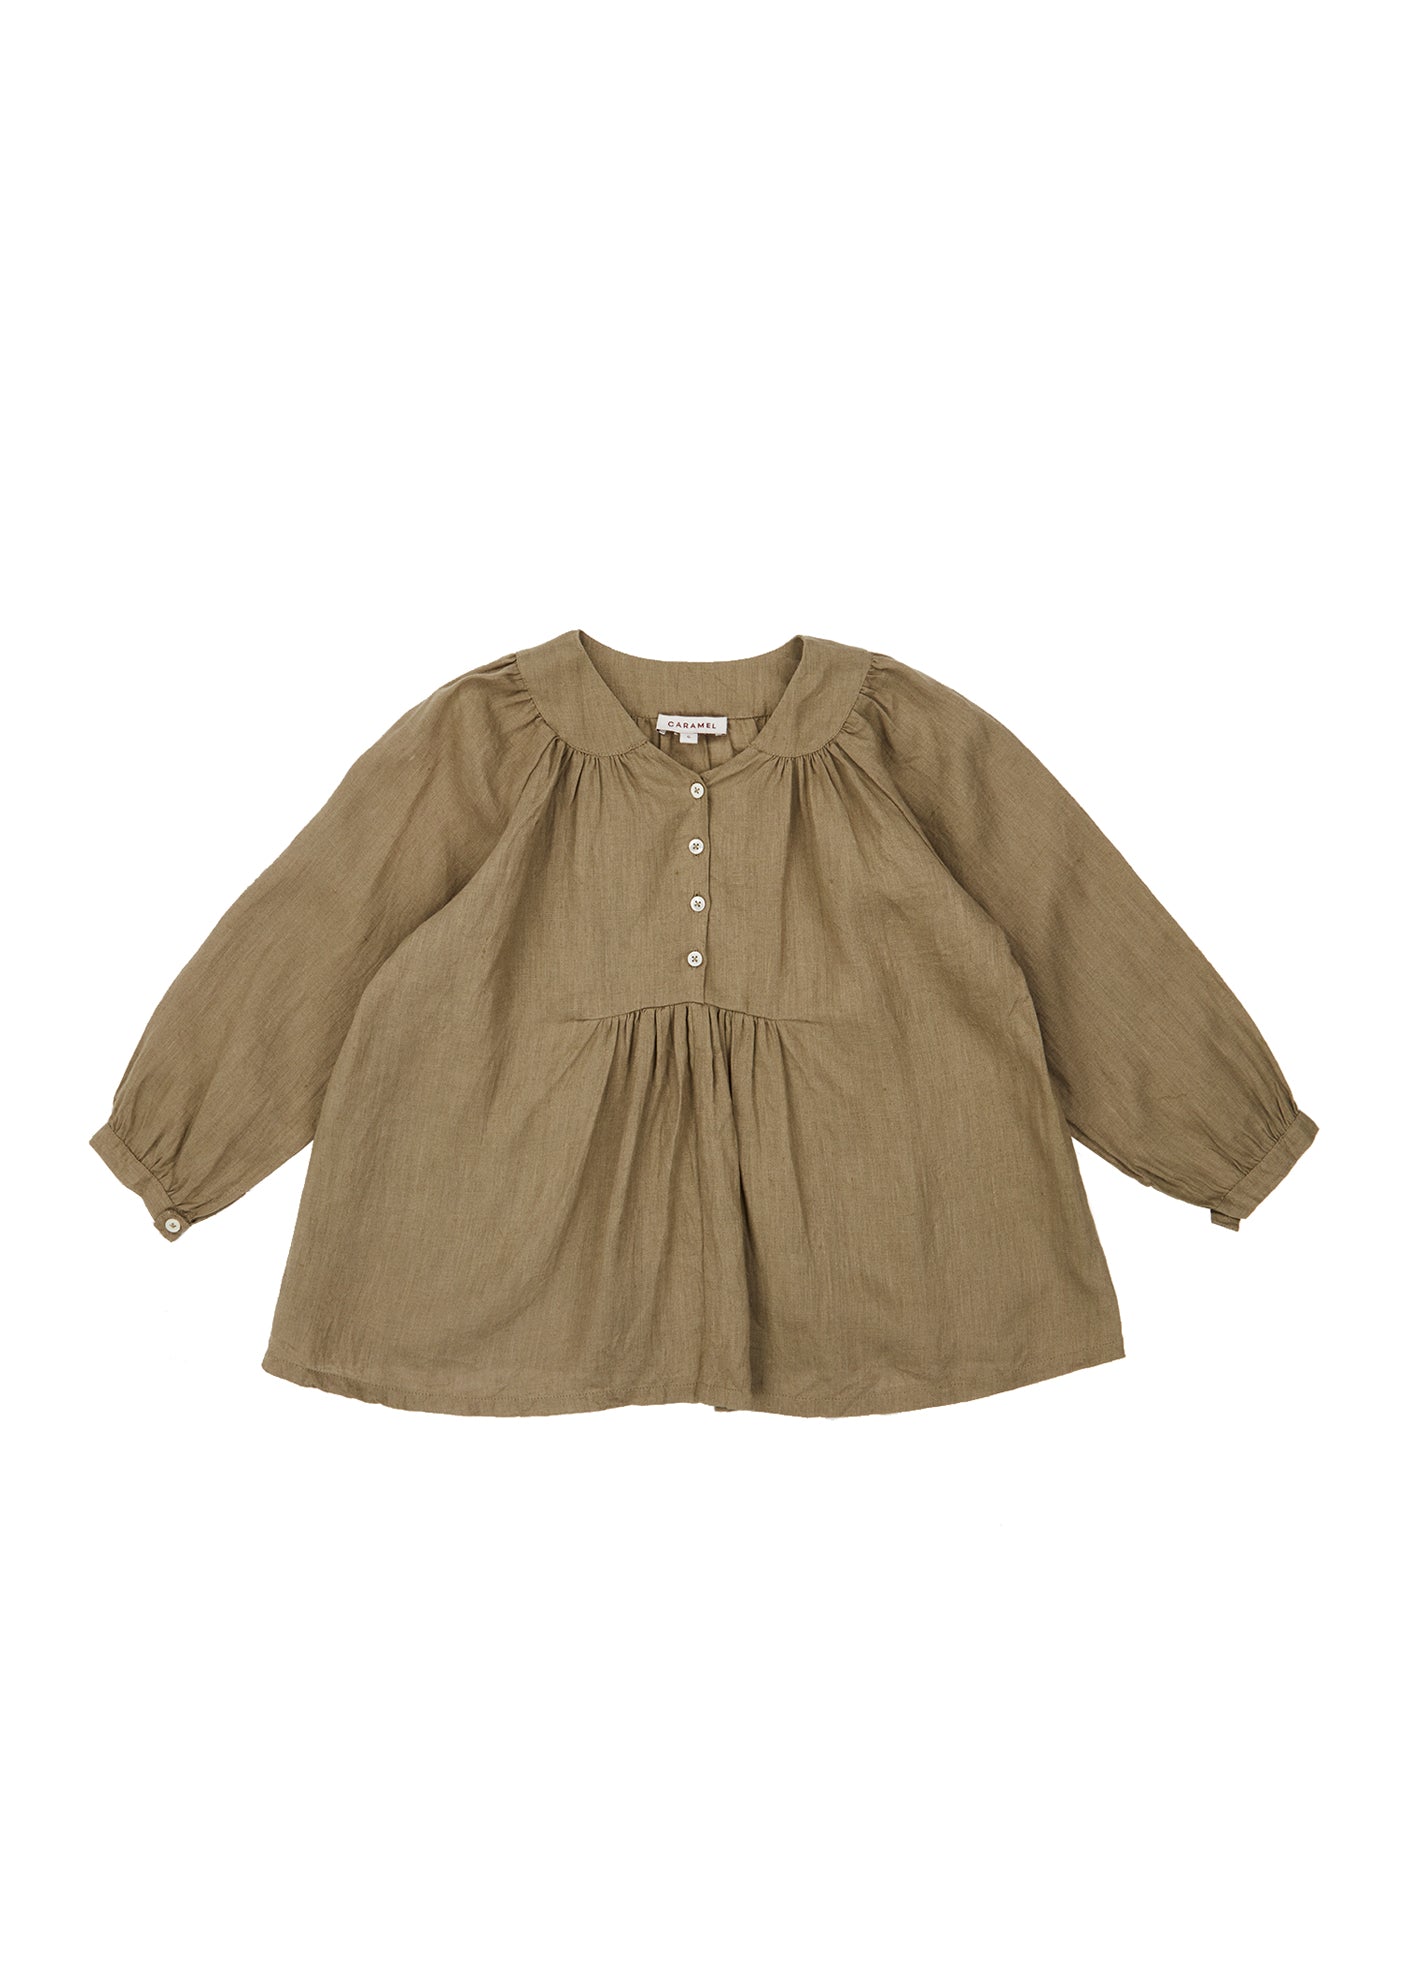 Baby Girls Olive Green Top